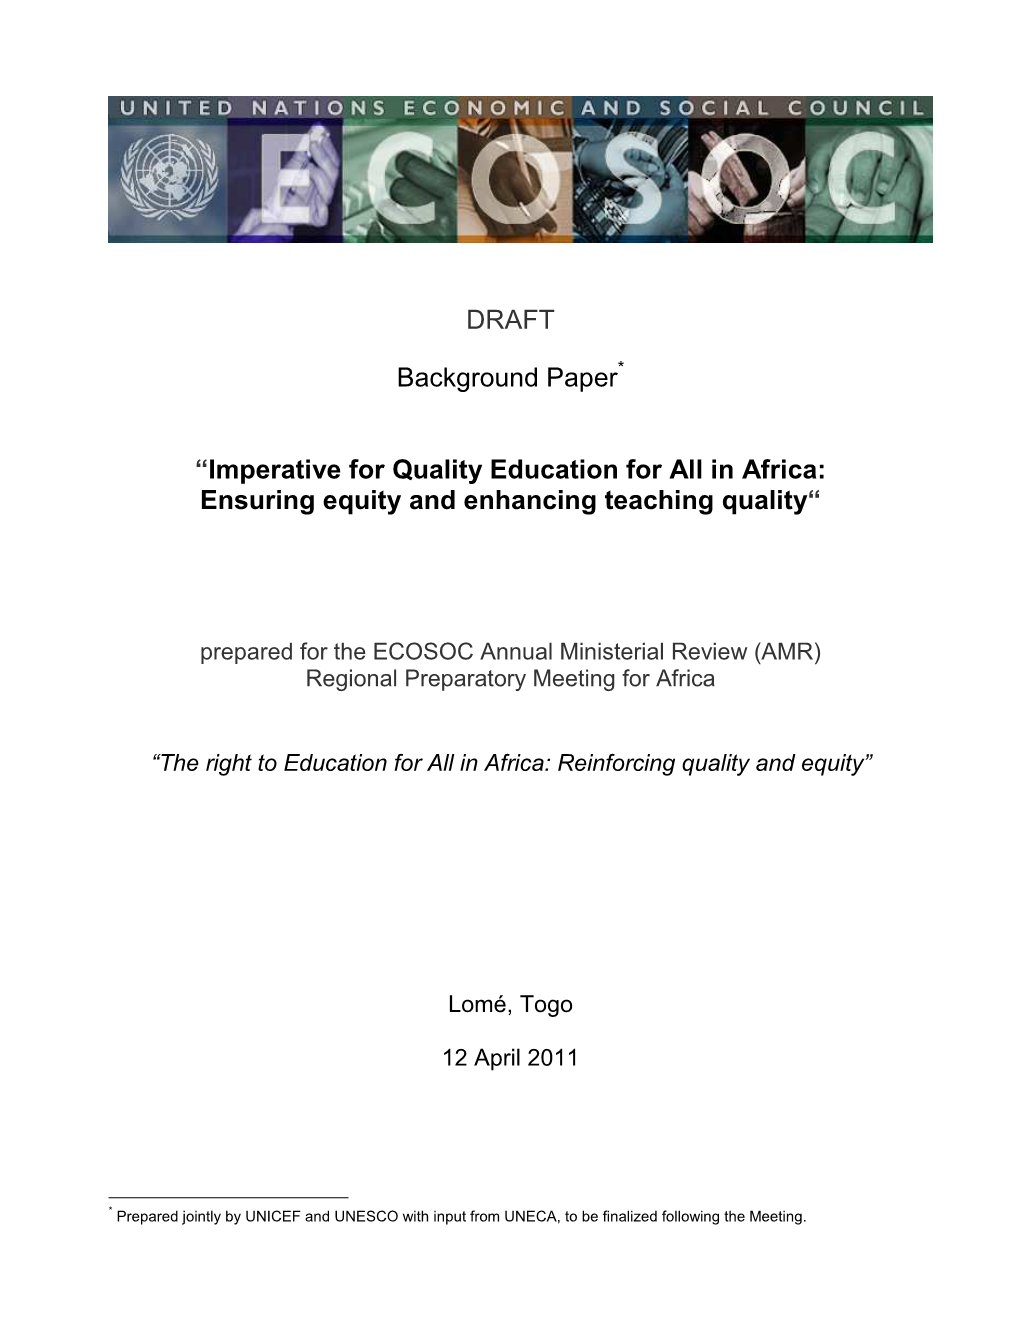 Imperative for Quality Education for All in Africa: Ensuring Equity and Enhancing Teaching Quality “